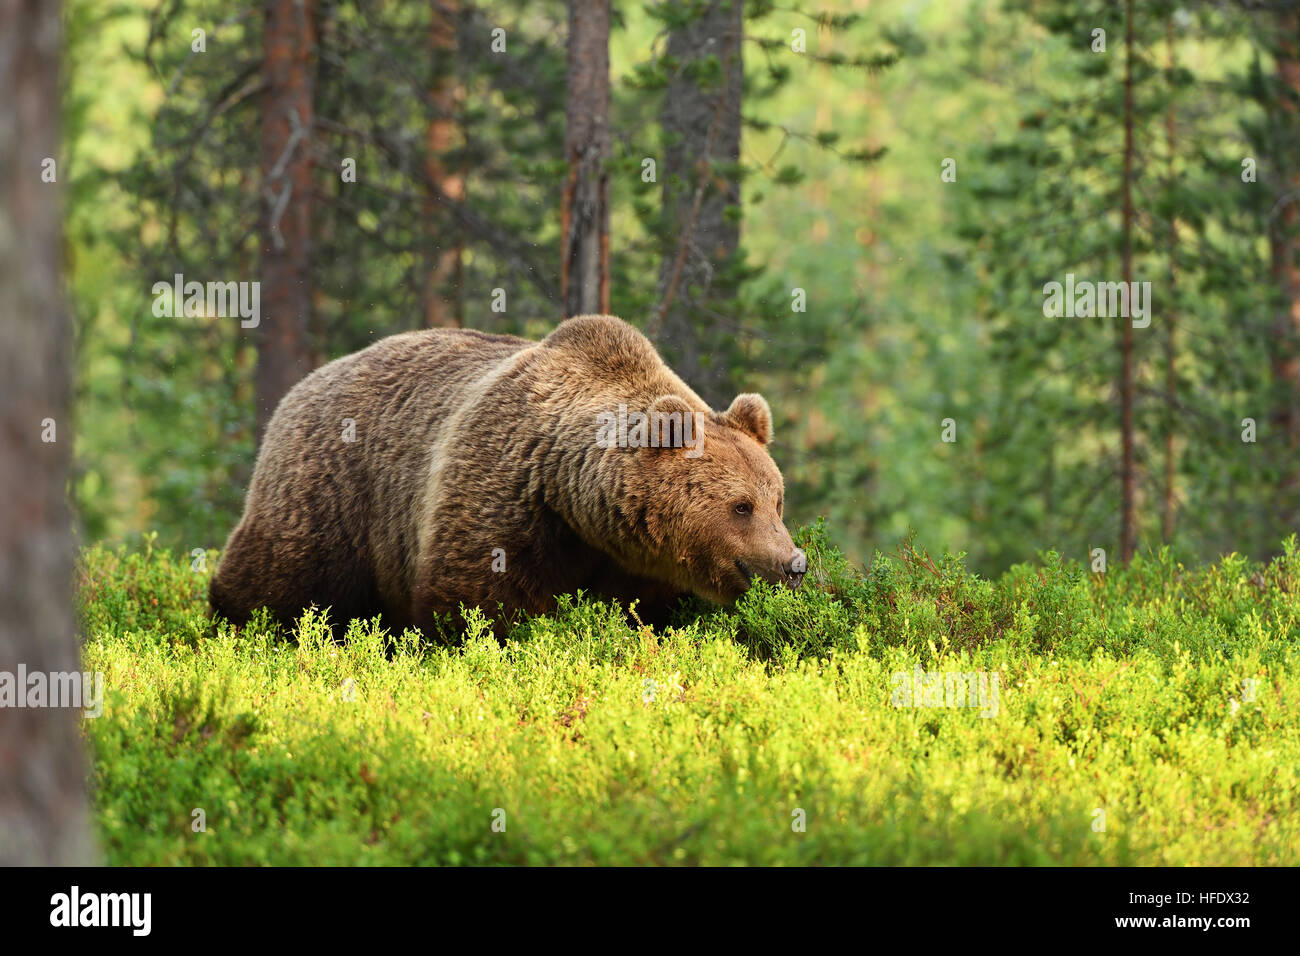 brown bear walking in a forest landscape at summer Stock Photo